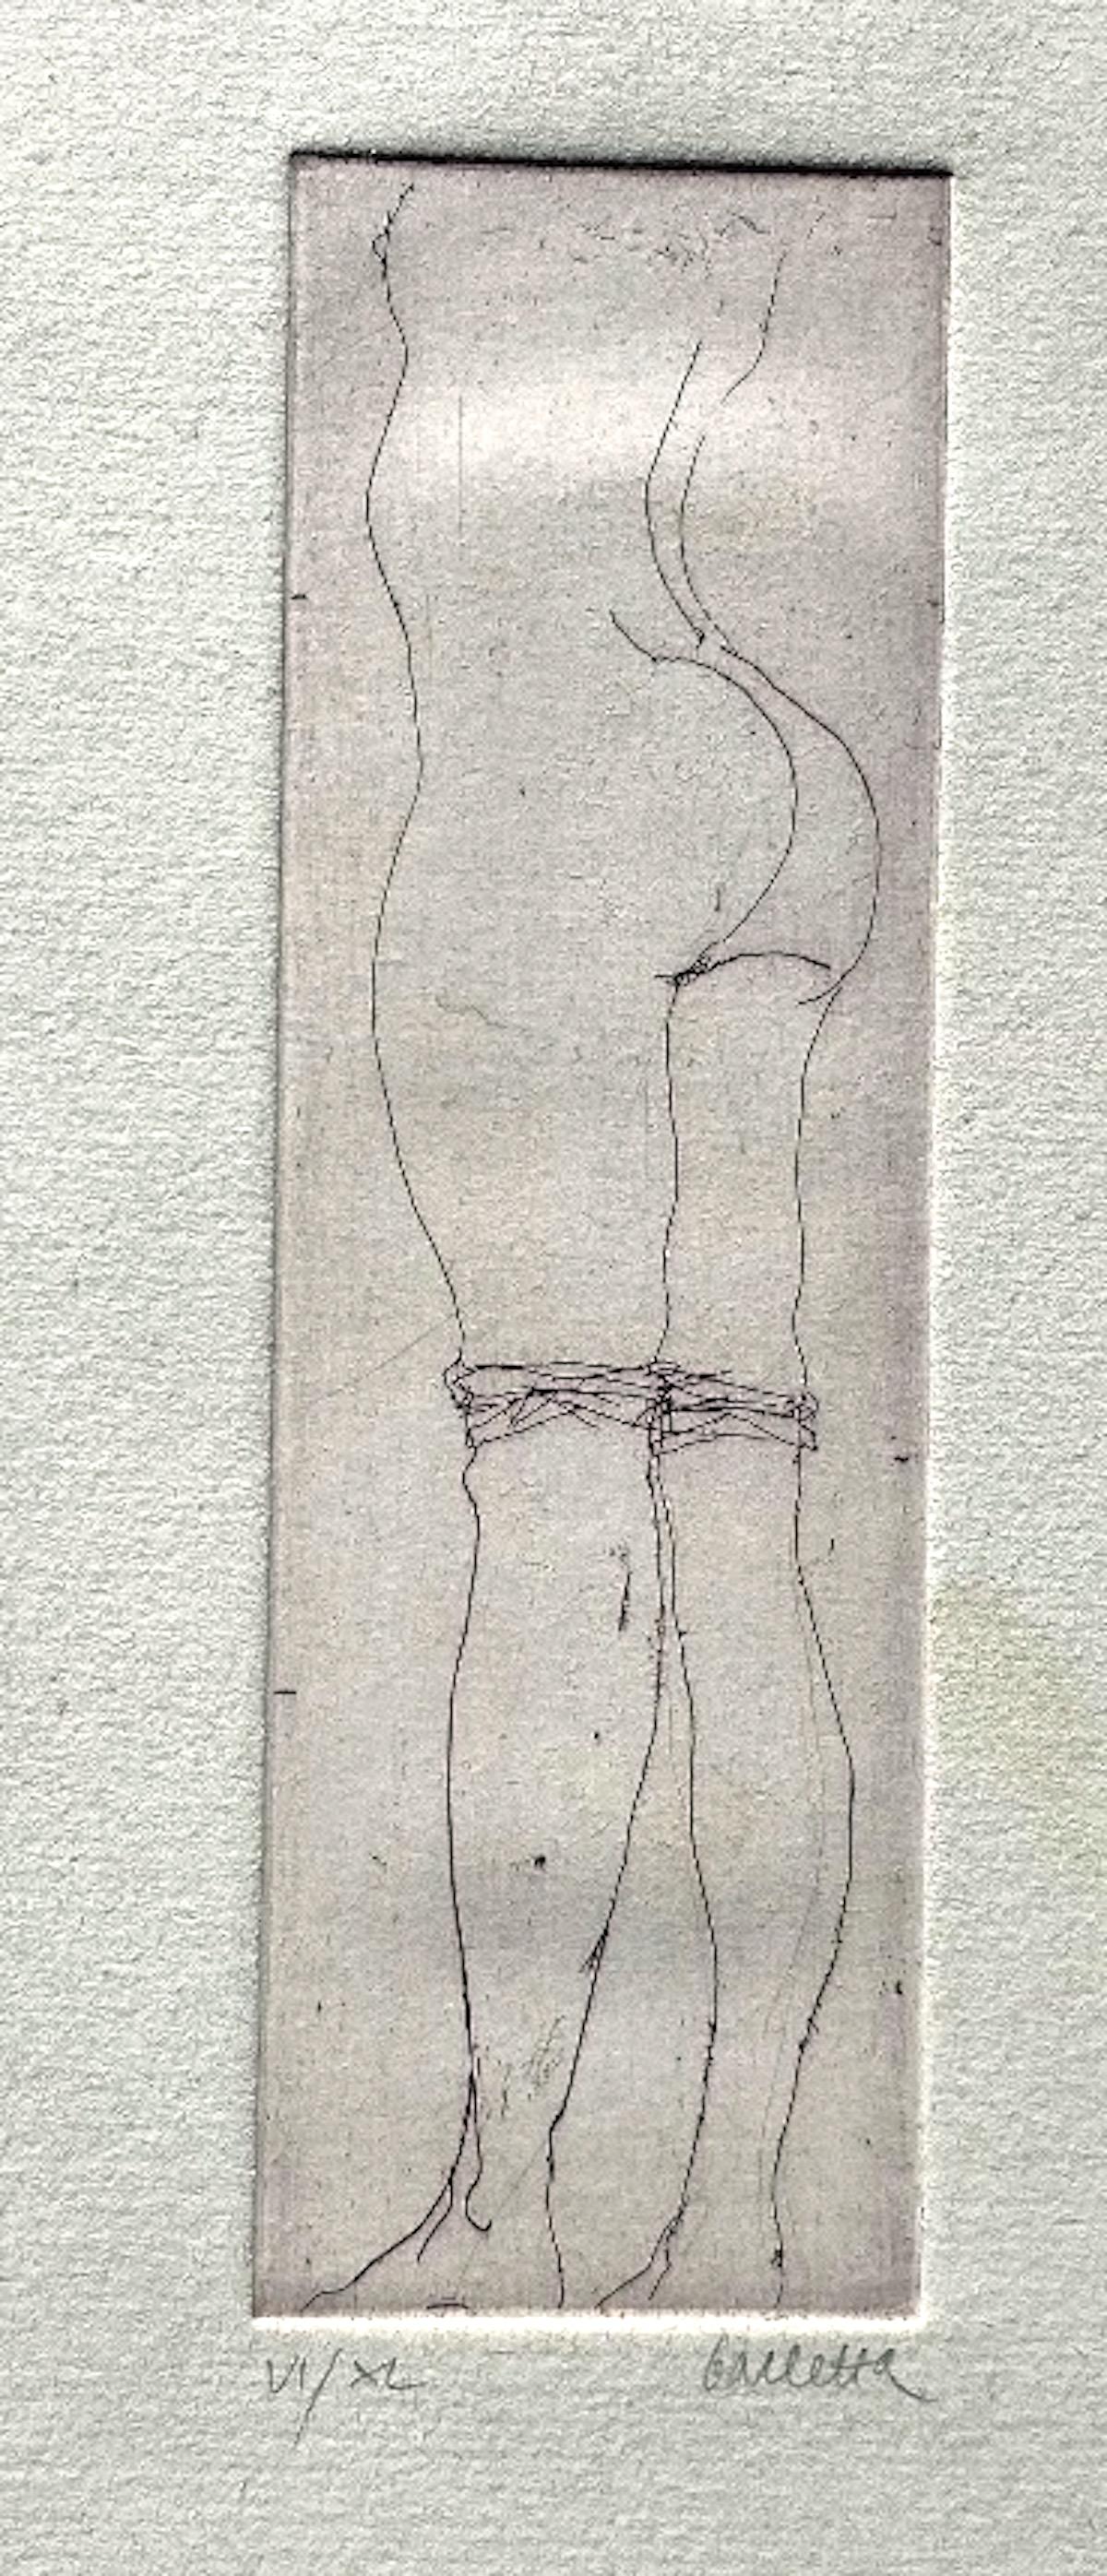 Nude -  Etching on Paper by Sergio Barletta - 1970s